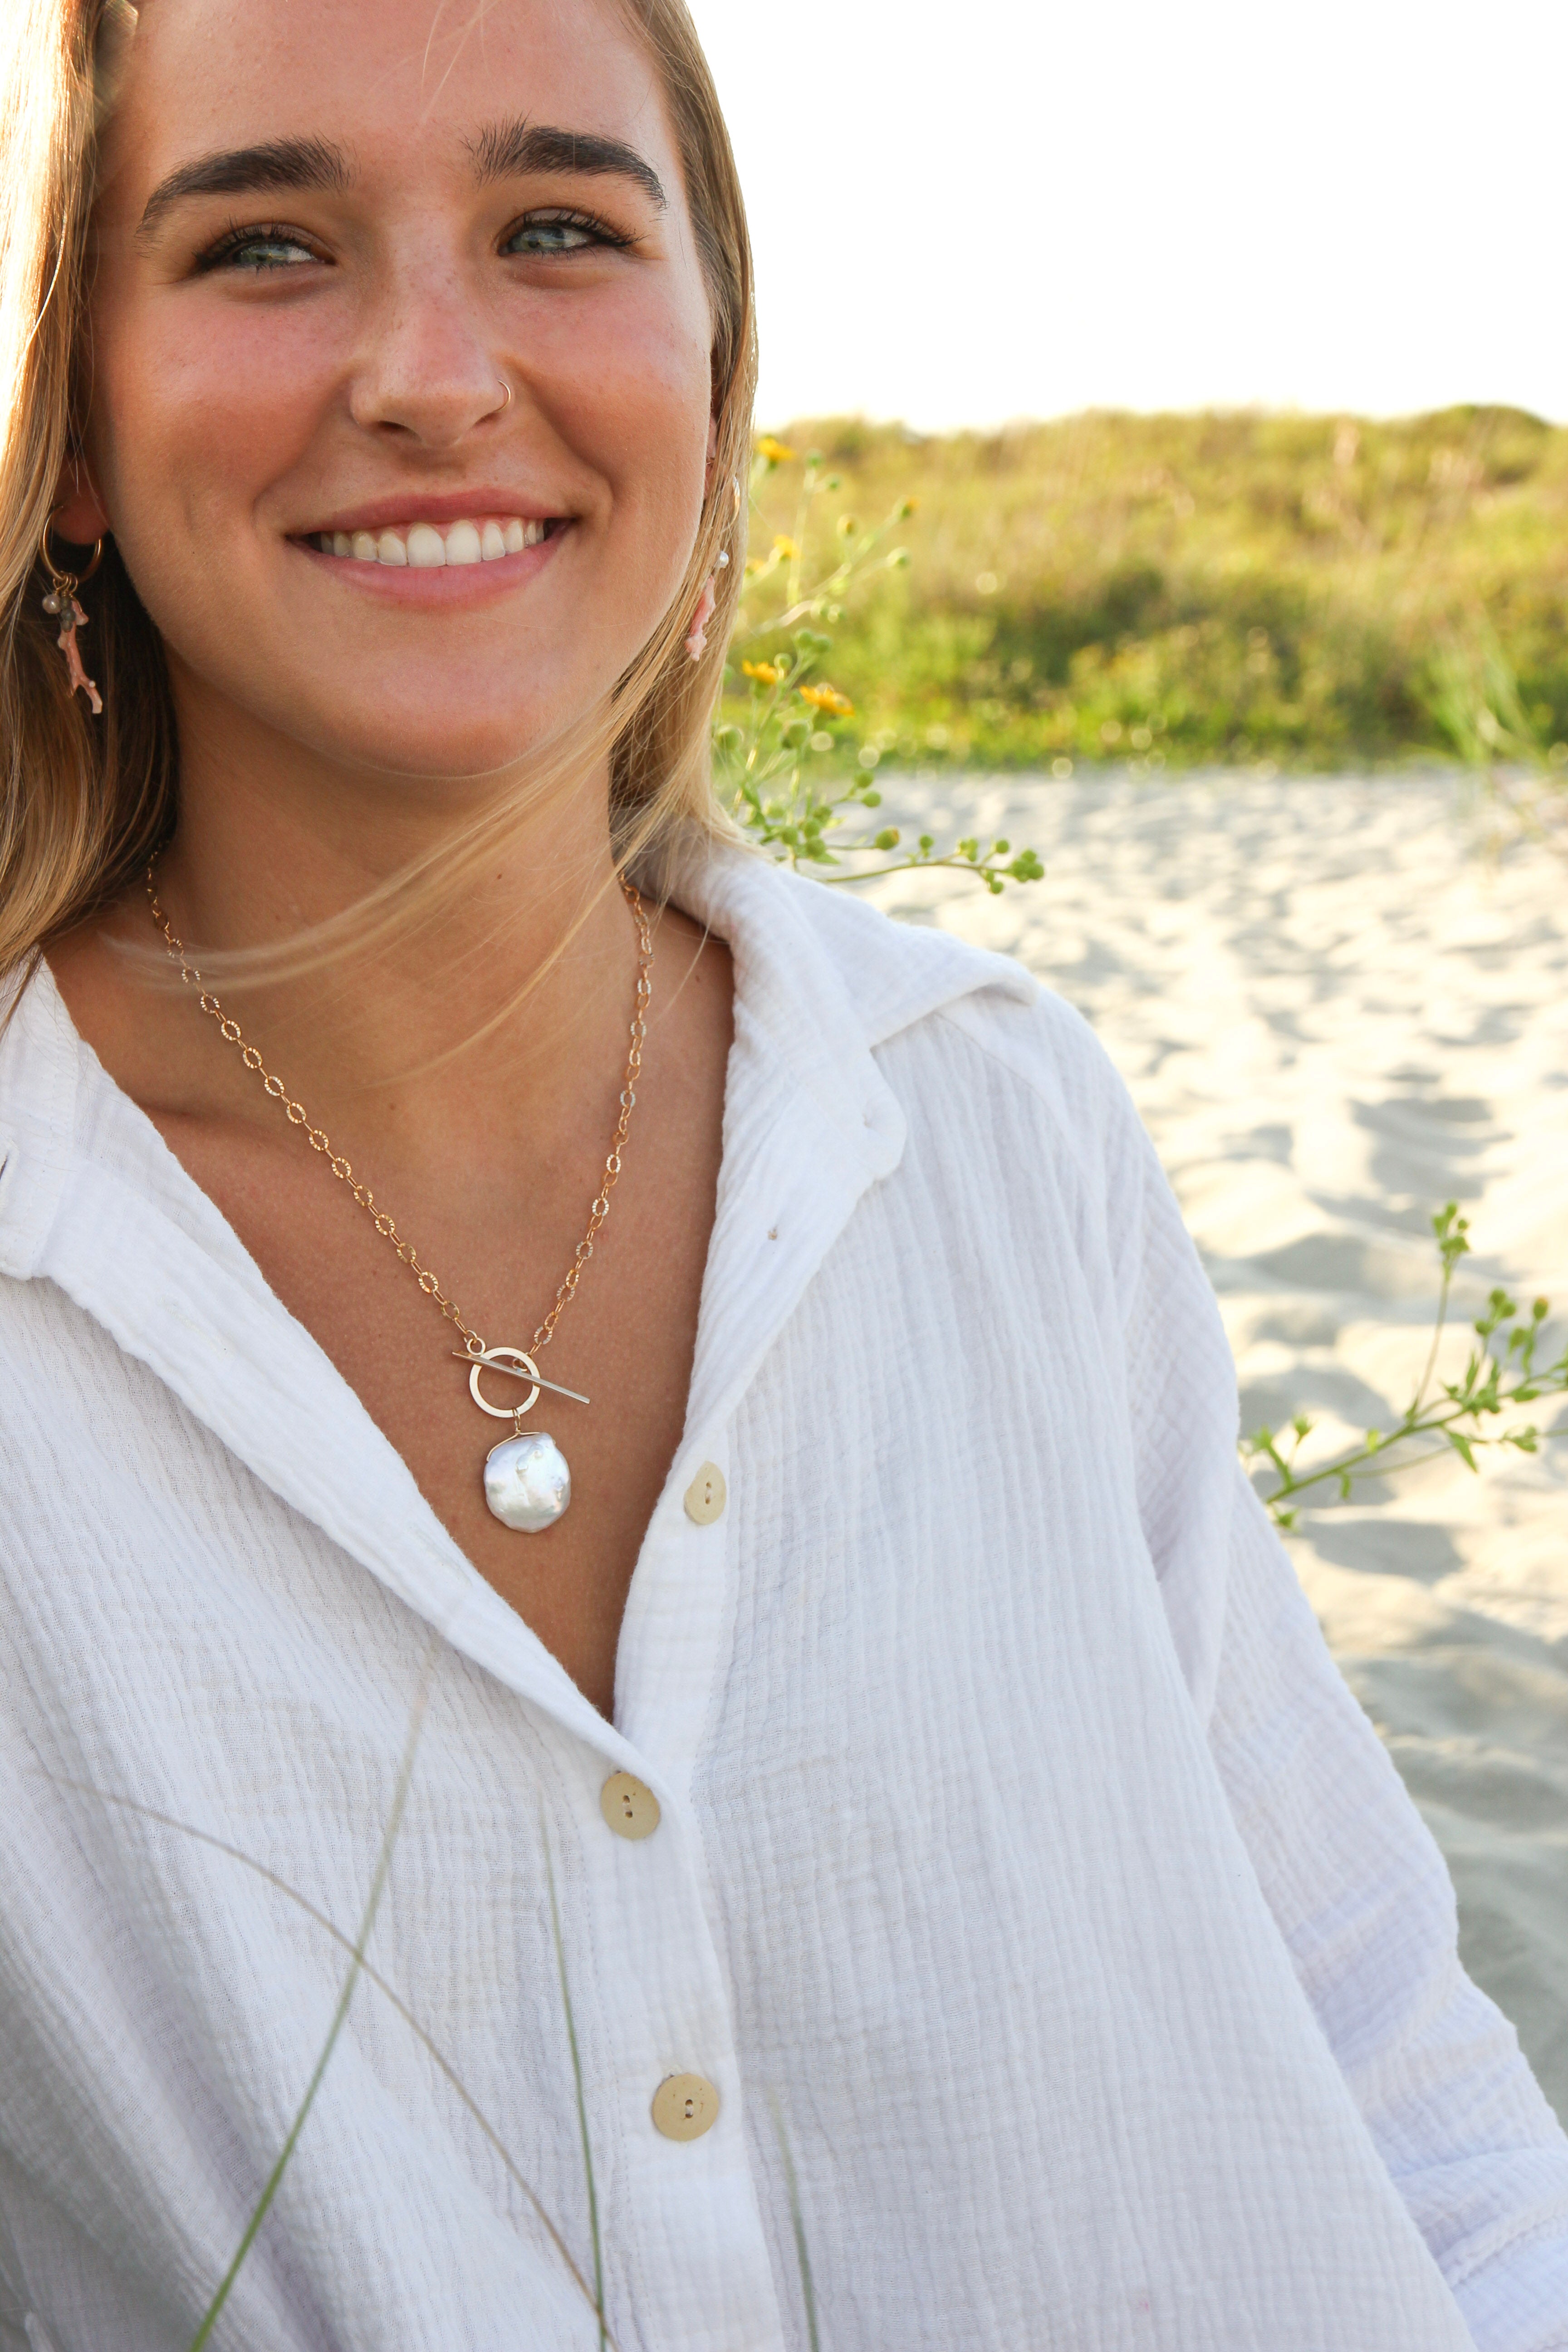 Gold chain necklace with a toggle clasp. There is a dime sized Cornflake pearl wire wrapped on the circular part of the clasp. Shown on a woman's neck who is on the beach.